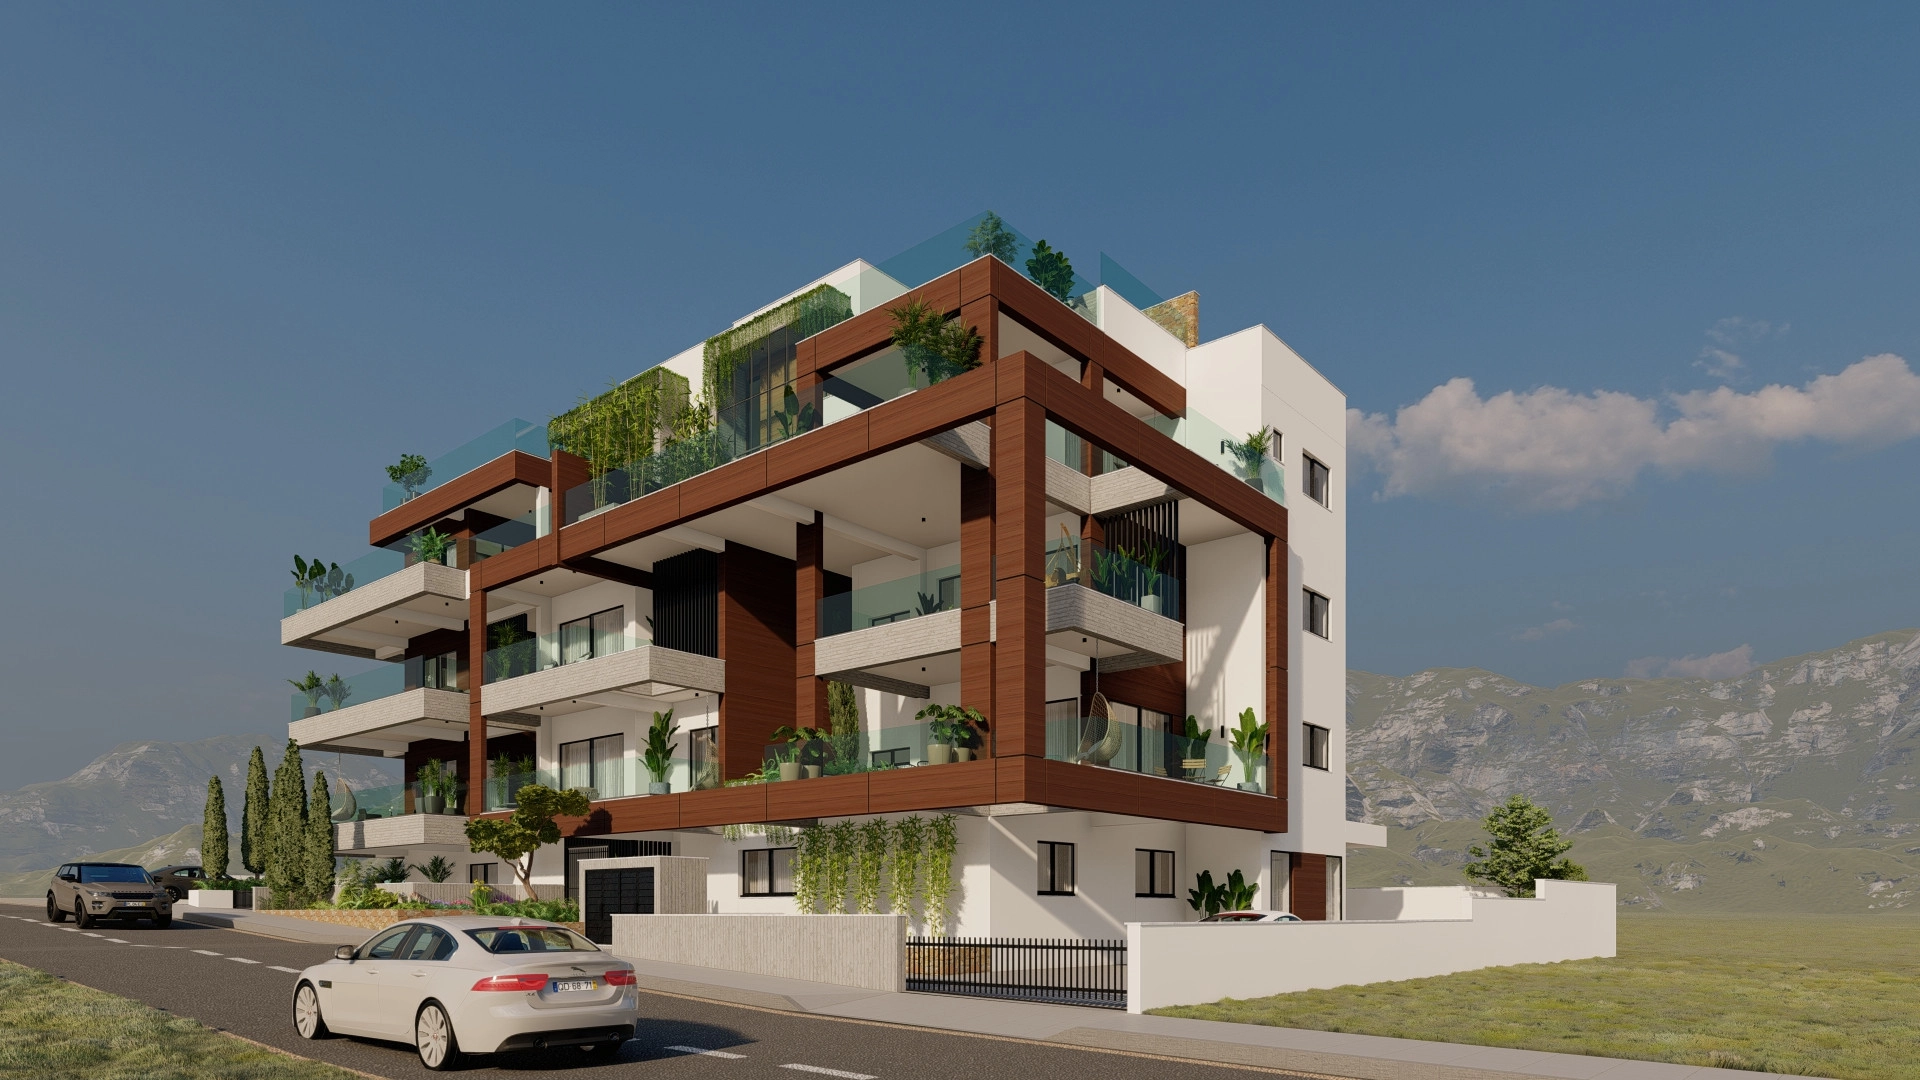 2 Bedroom Apartment for Sale in Limassol – Αgios Athanasios